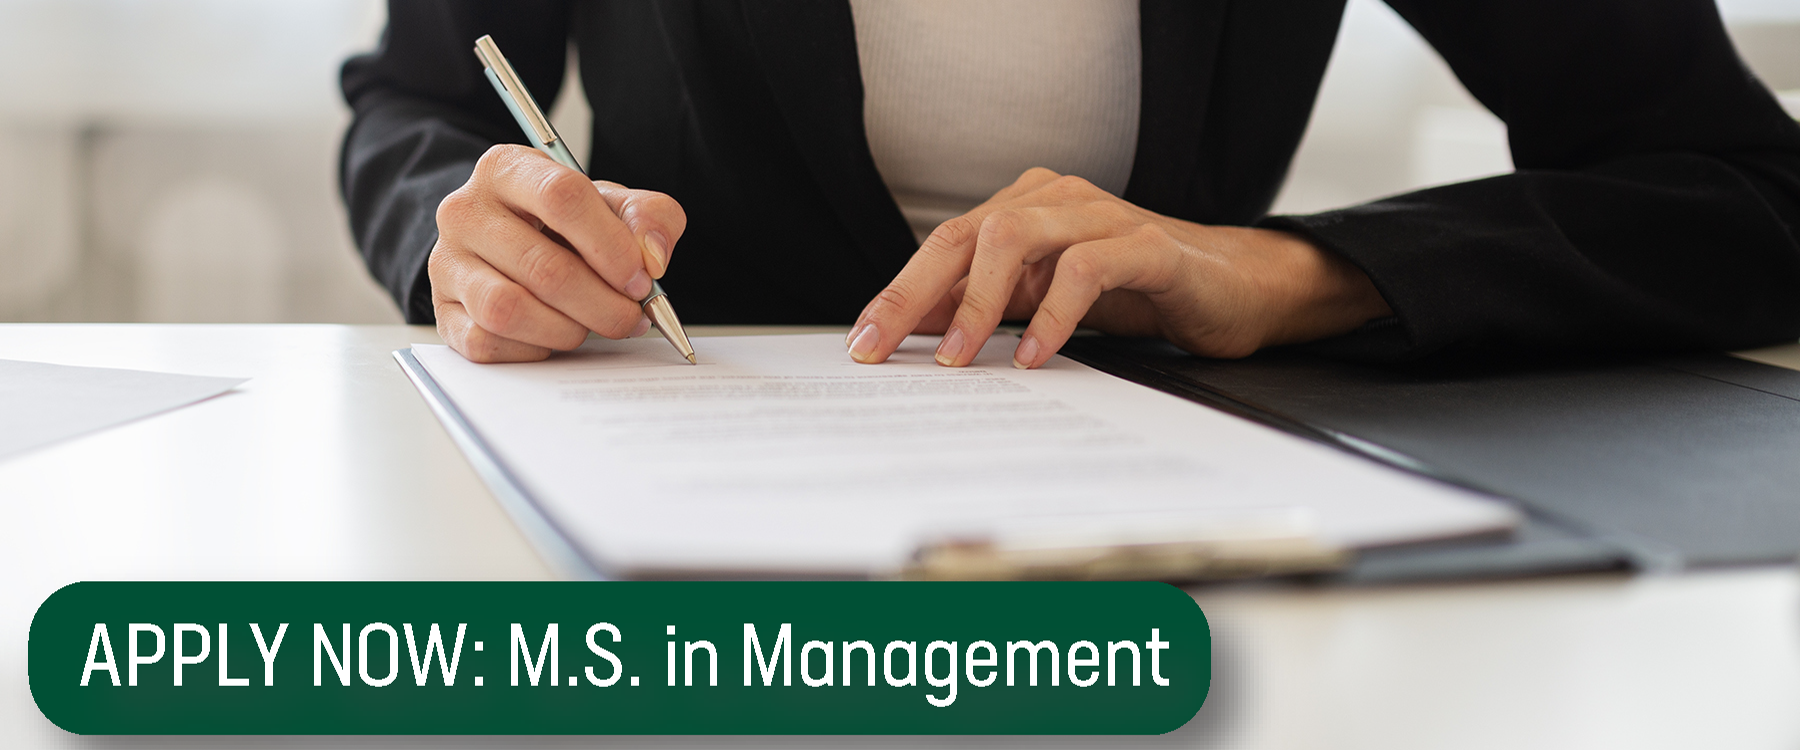 Apply Now: M.S. in Management